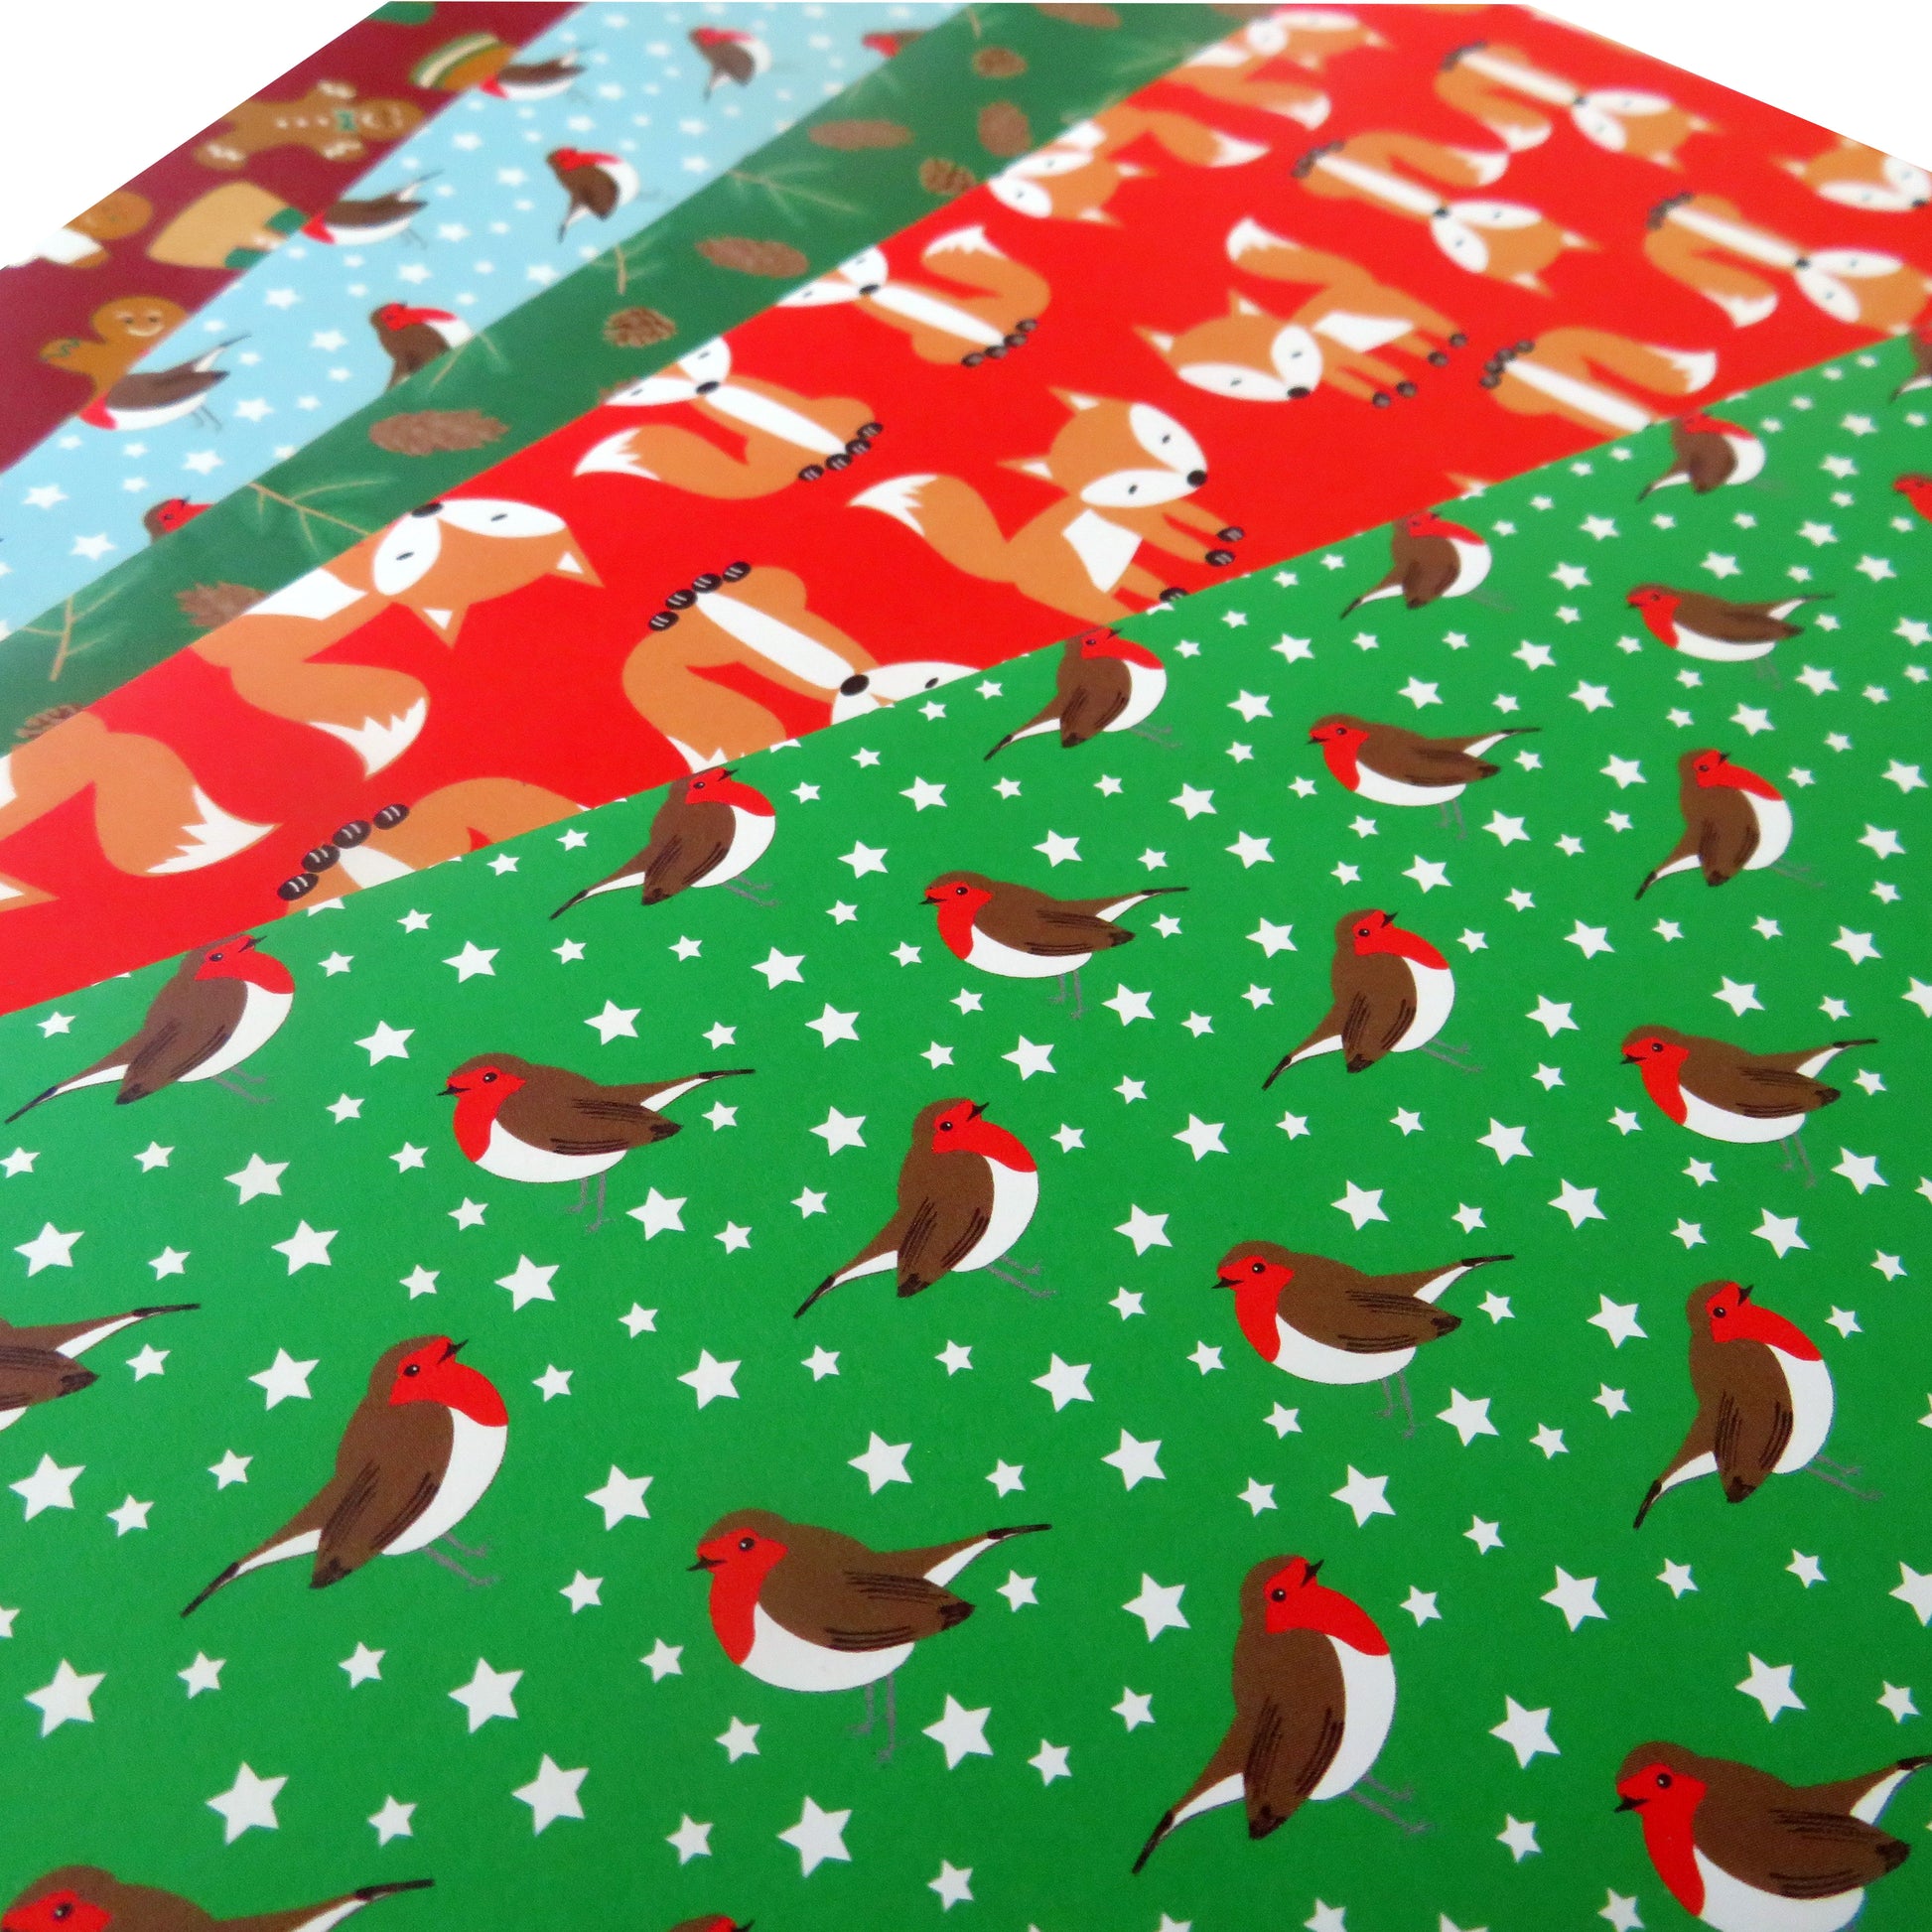 Christmas gift wrap selection from UmmPixies showing green robins design at top of the pile